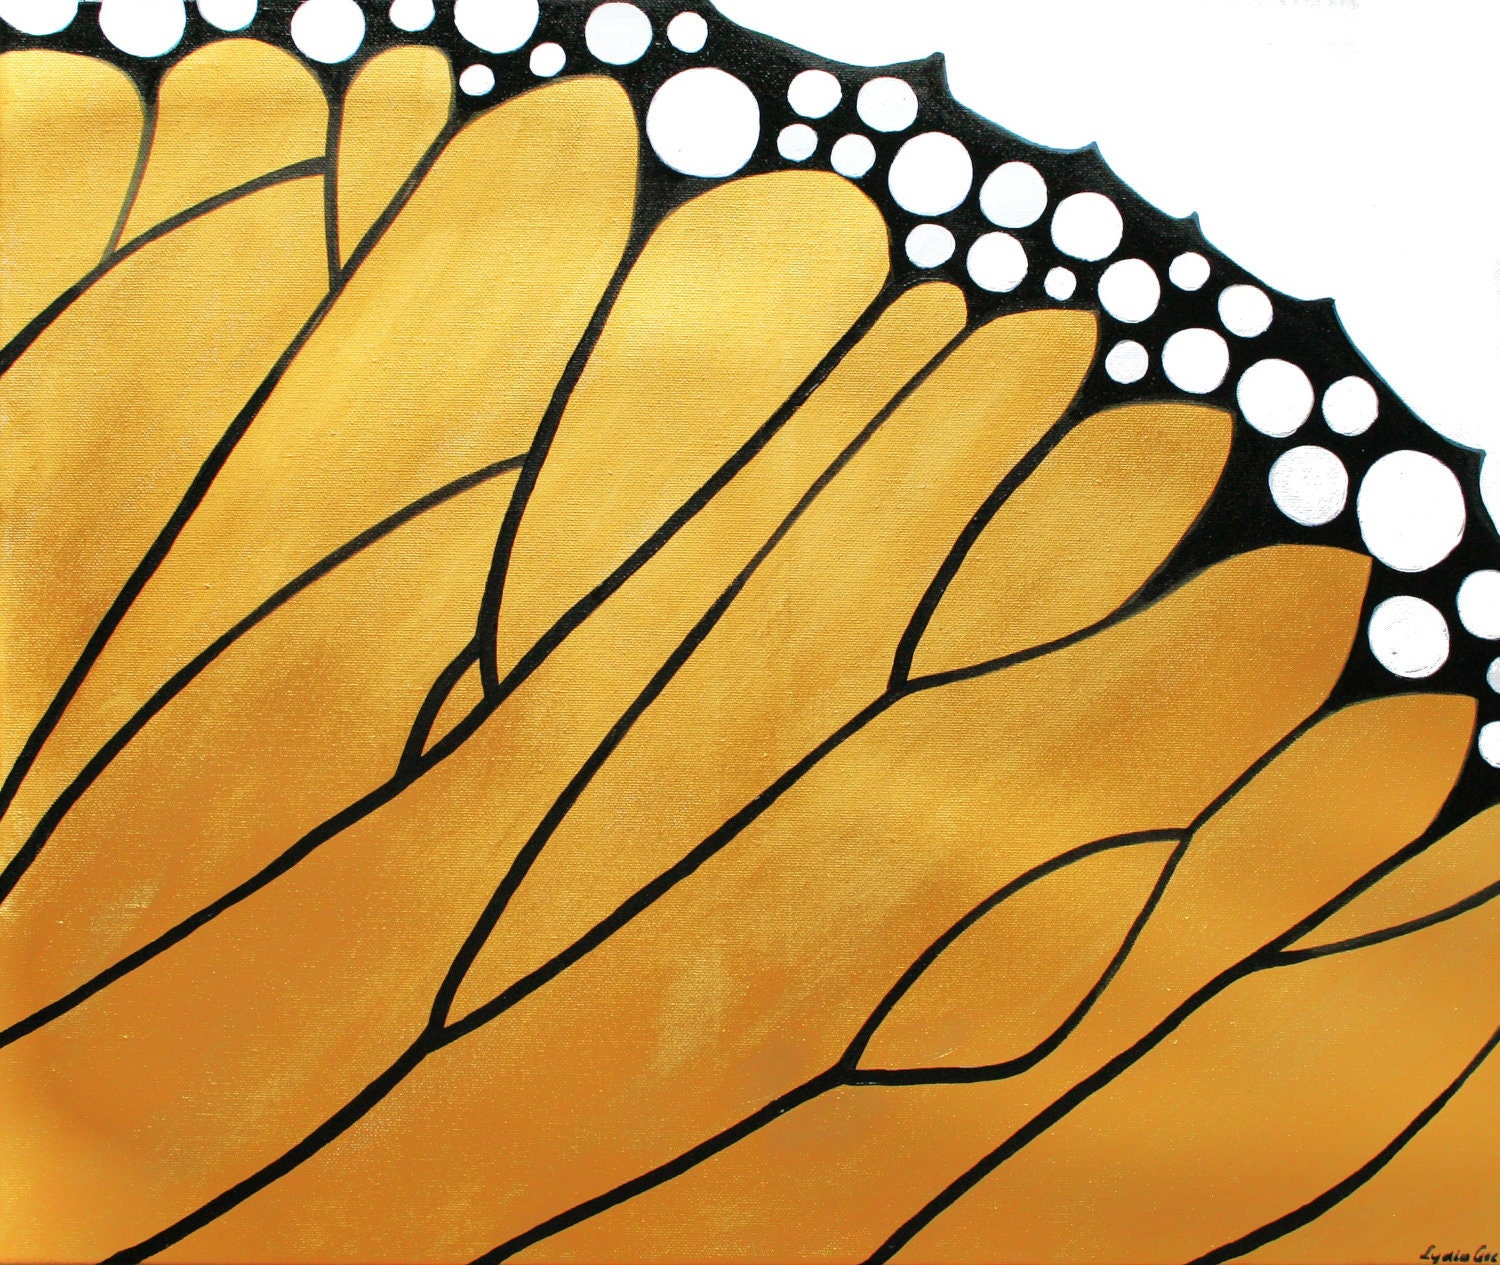 Monarch butterfly painting with Swarovski - Butterfly Effect - butterfly wing golden painting - butterfly art - yellow abstract by Lydia Gee - LydiaGee